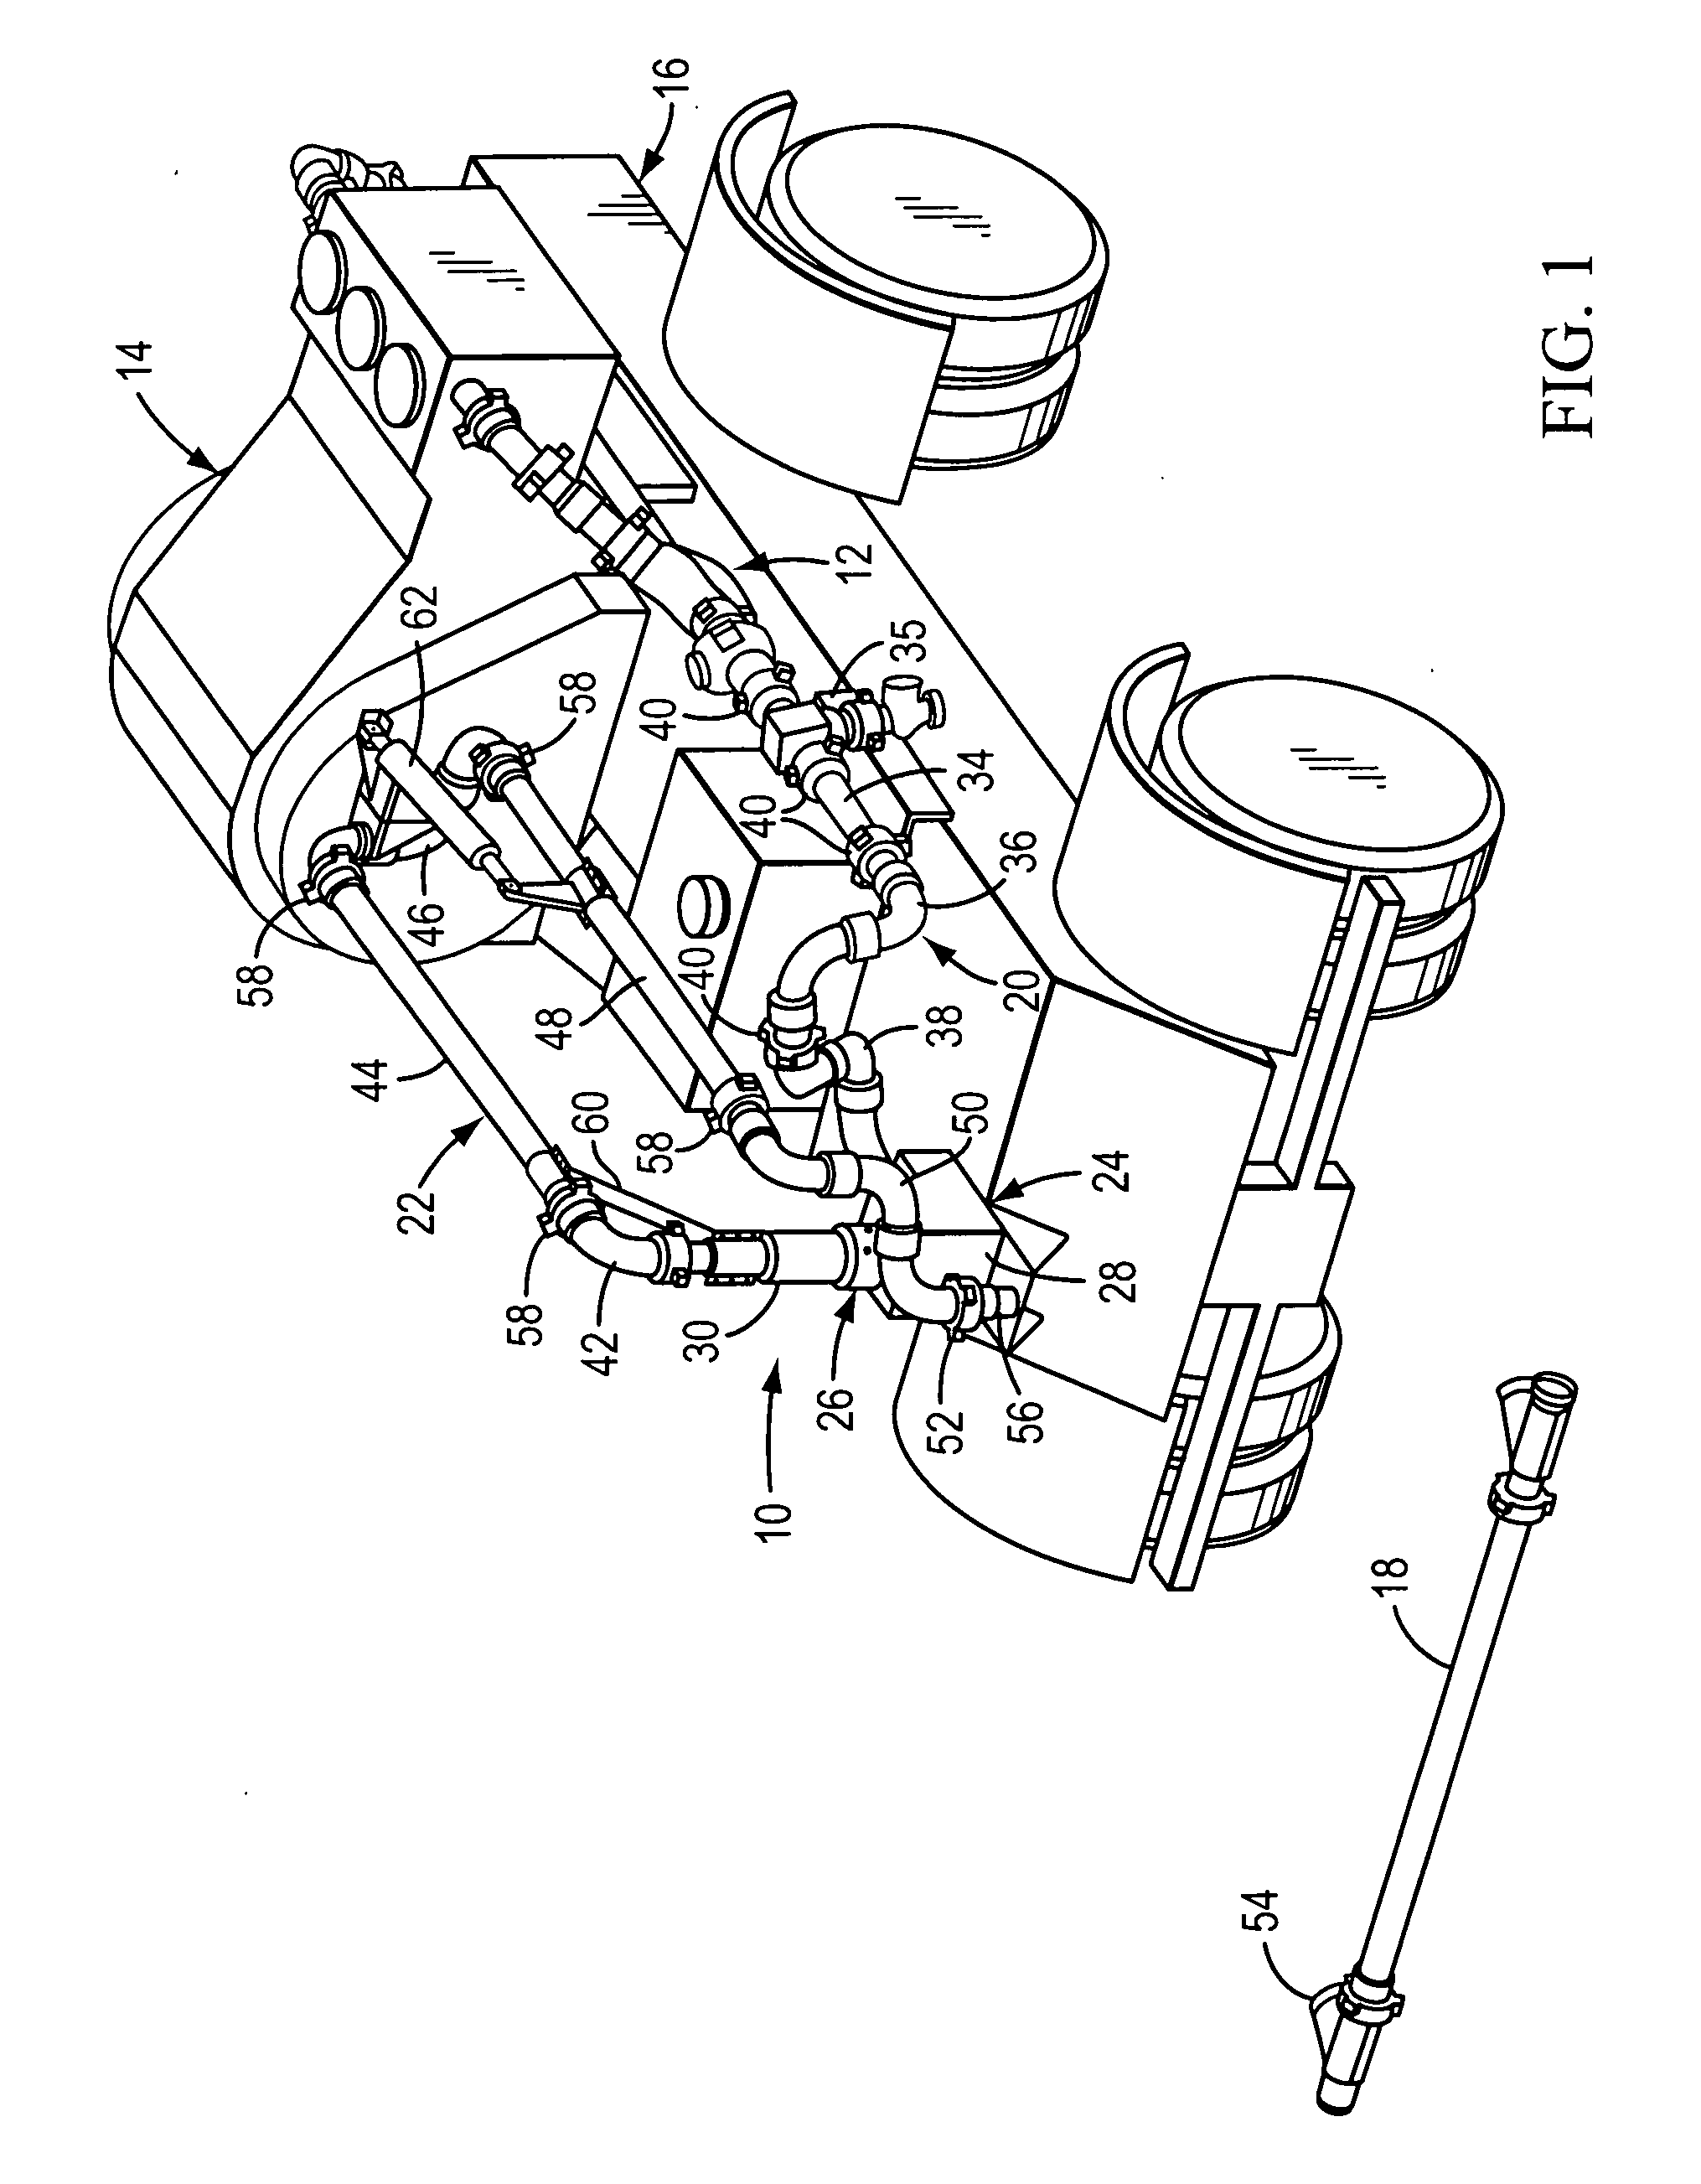 Discharge arm assembly for pumping units